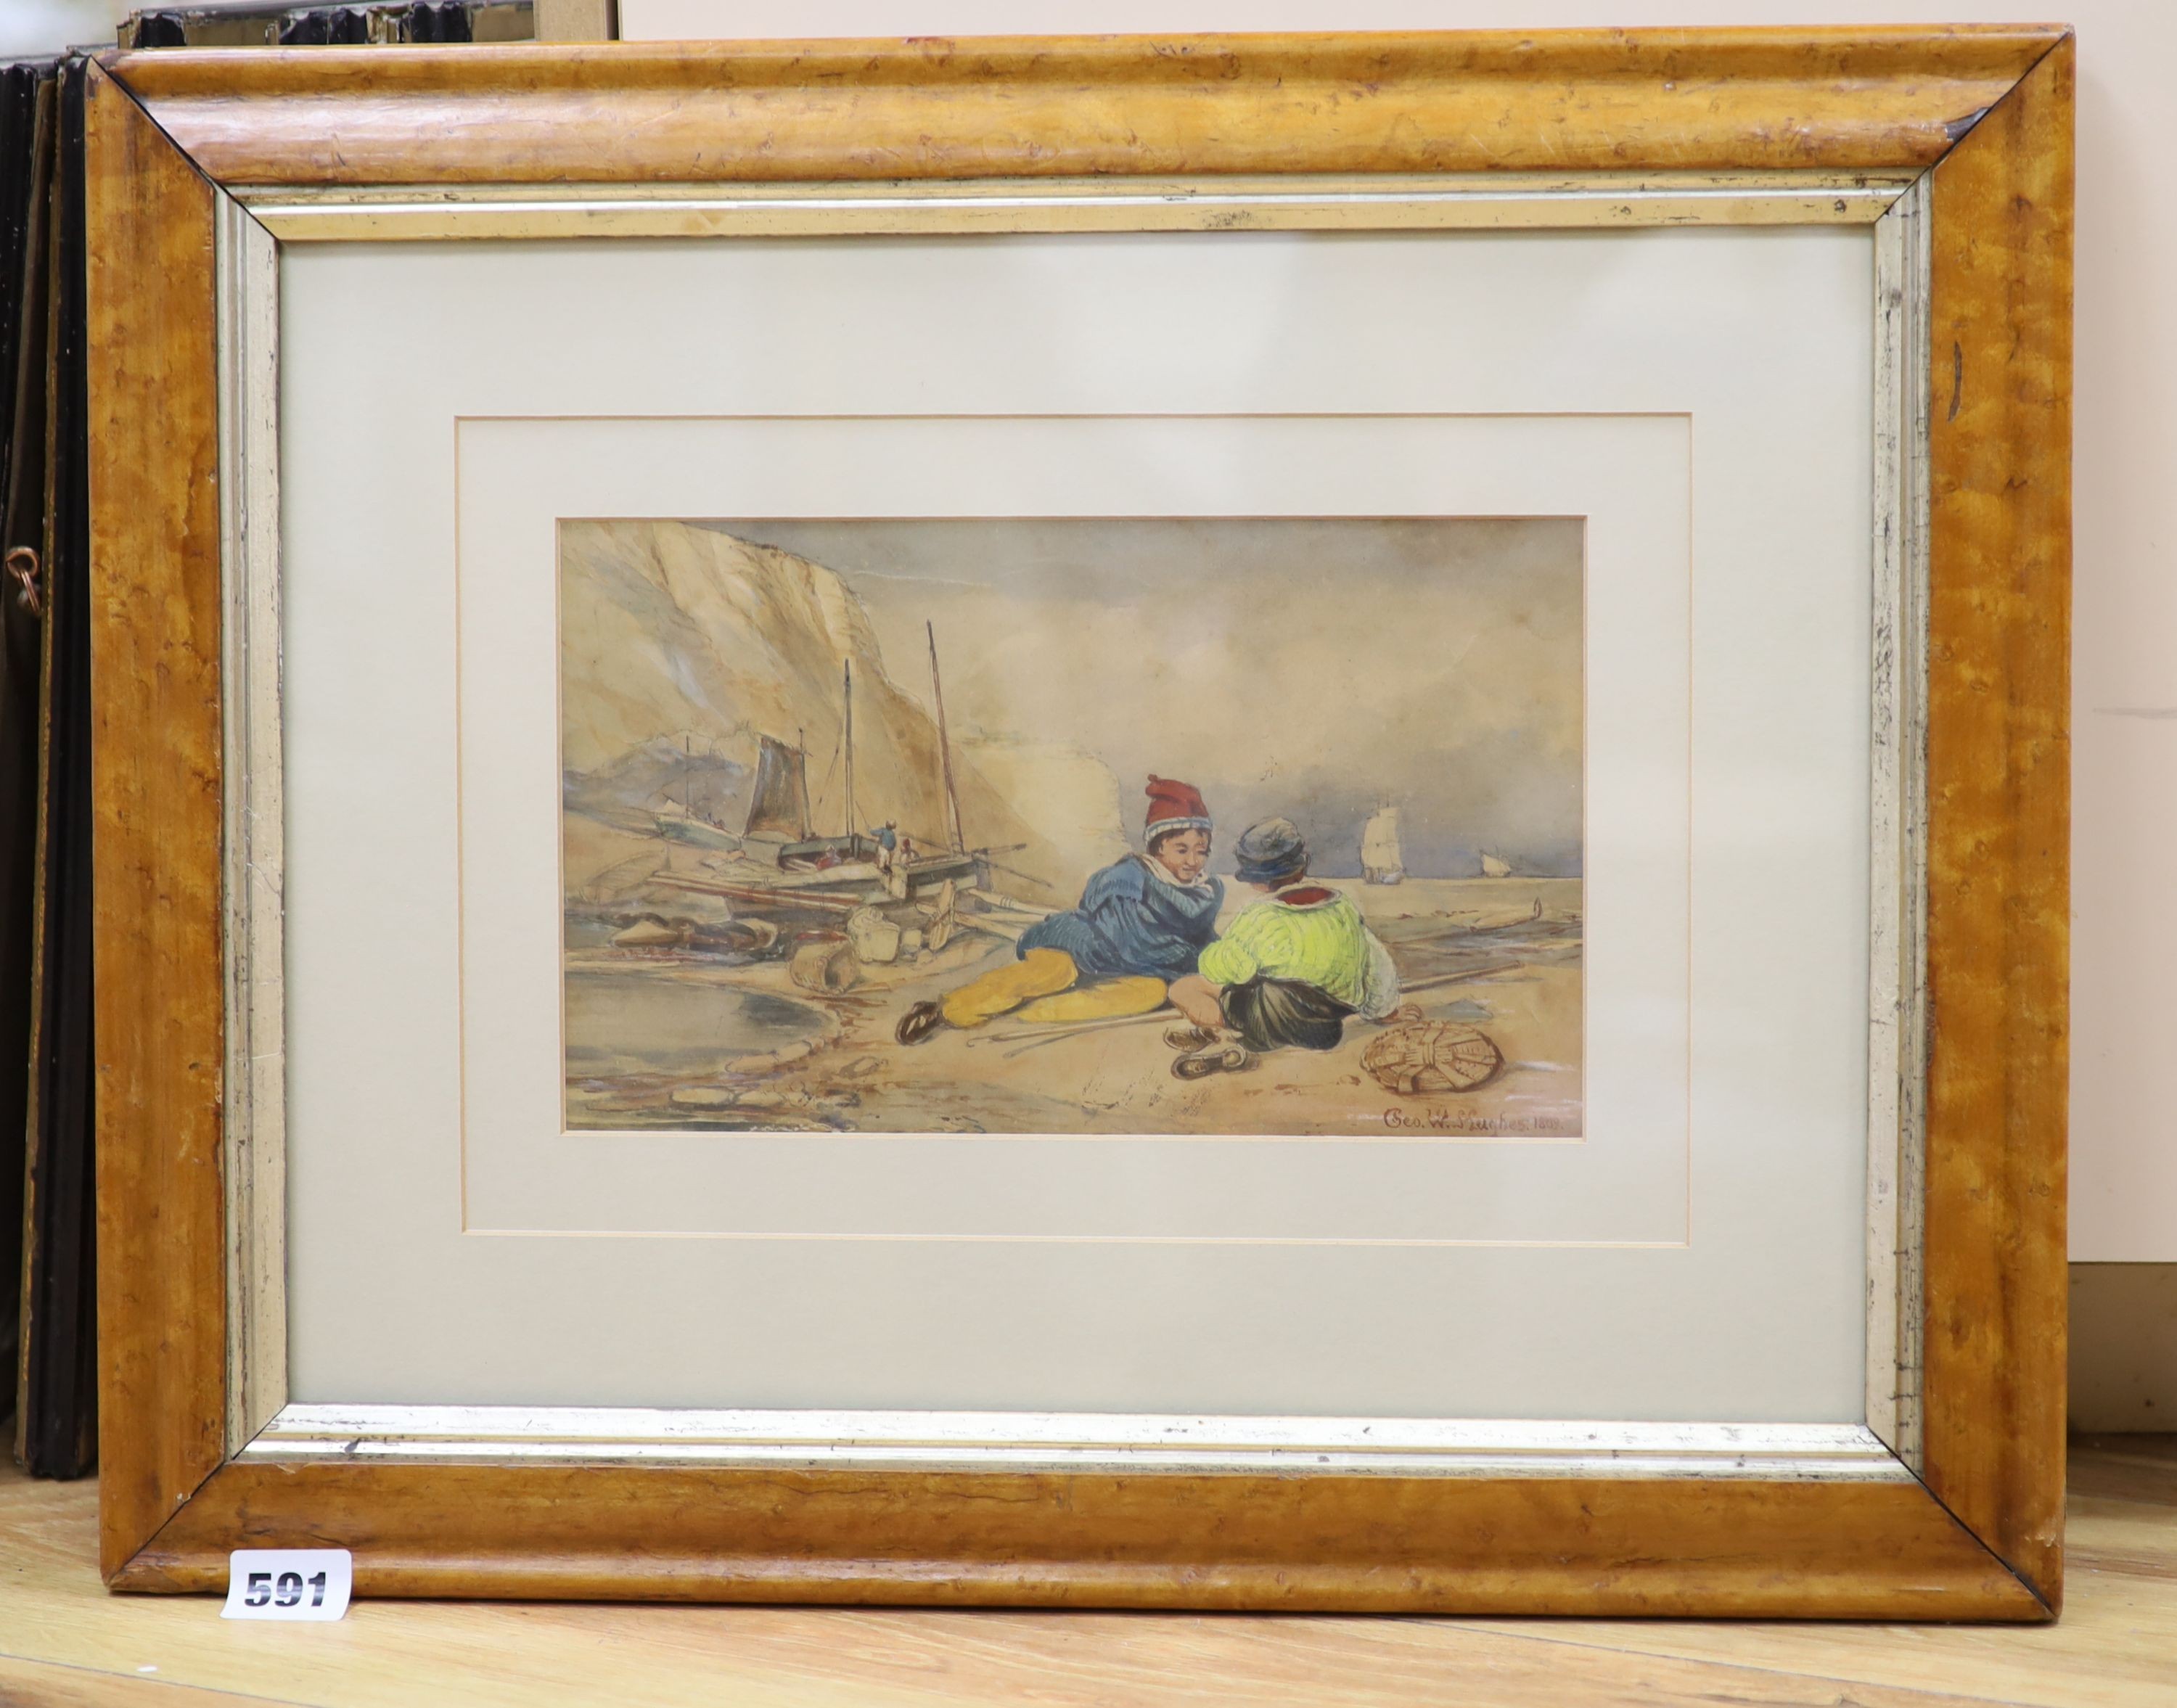 George W. Hughes (fl.1813-58), watercolour, Fisherboys on the shore, signed and dated 1809, 15 x - Image 2 of 2